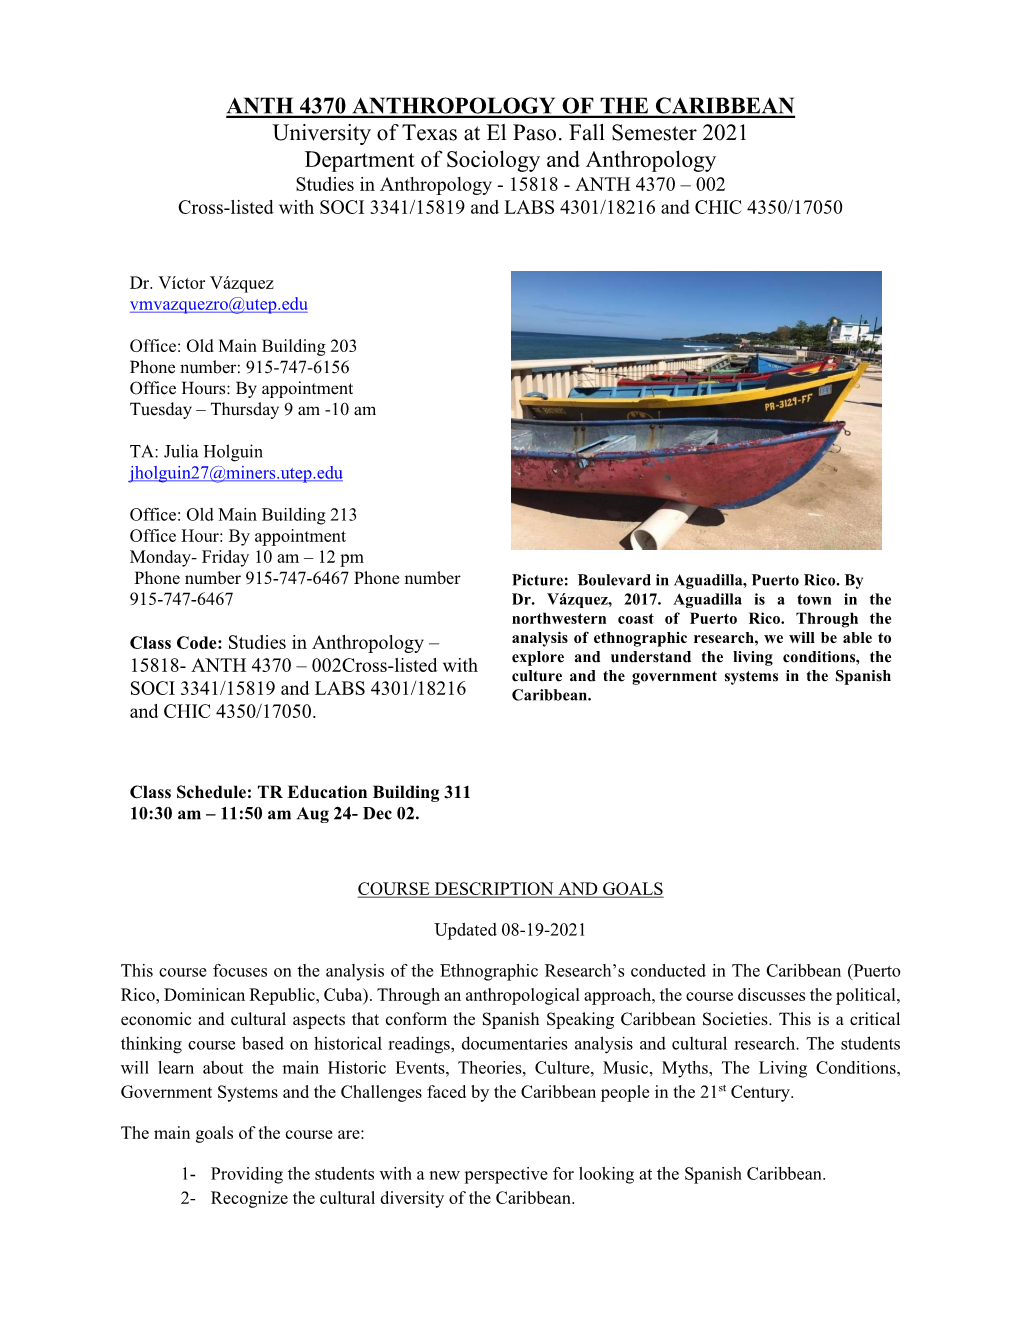 Anthropology of the Caribbean Dr. Victor Vazquez Fall 2021 ANTH